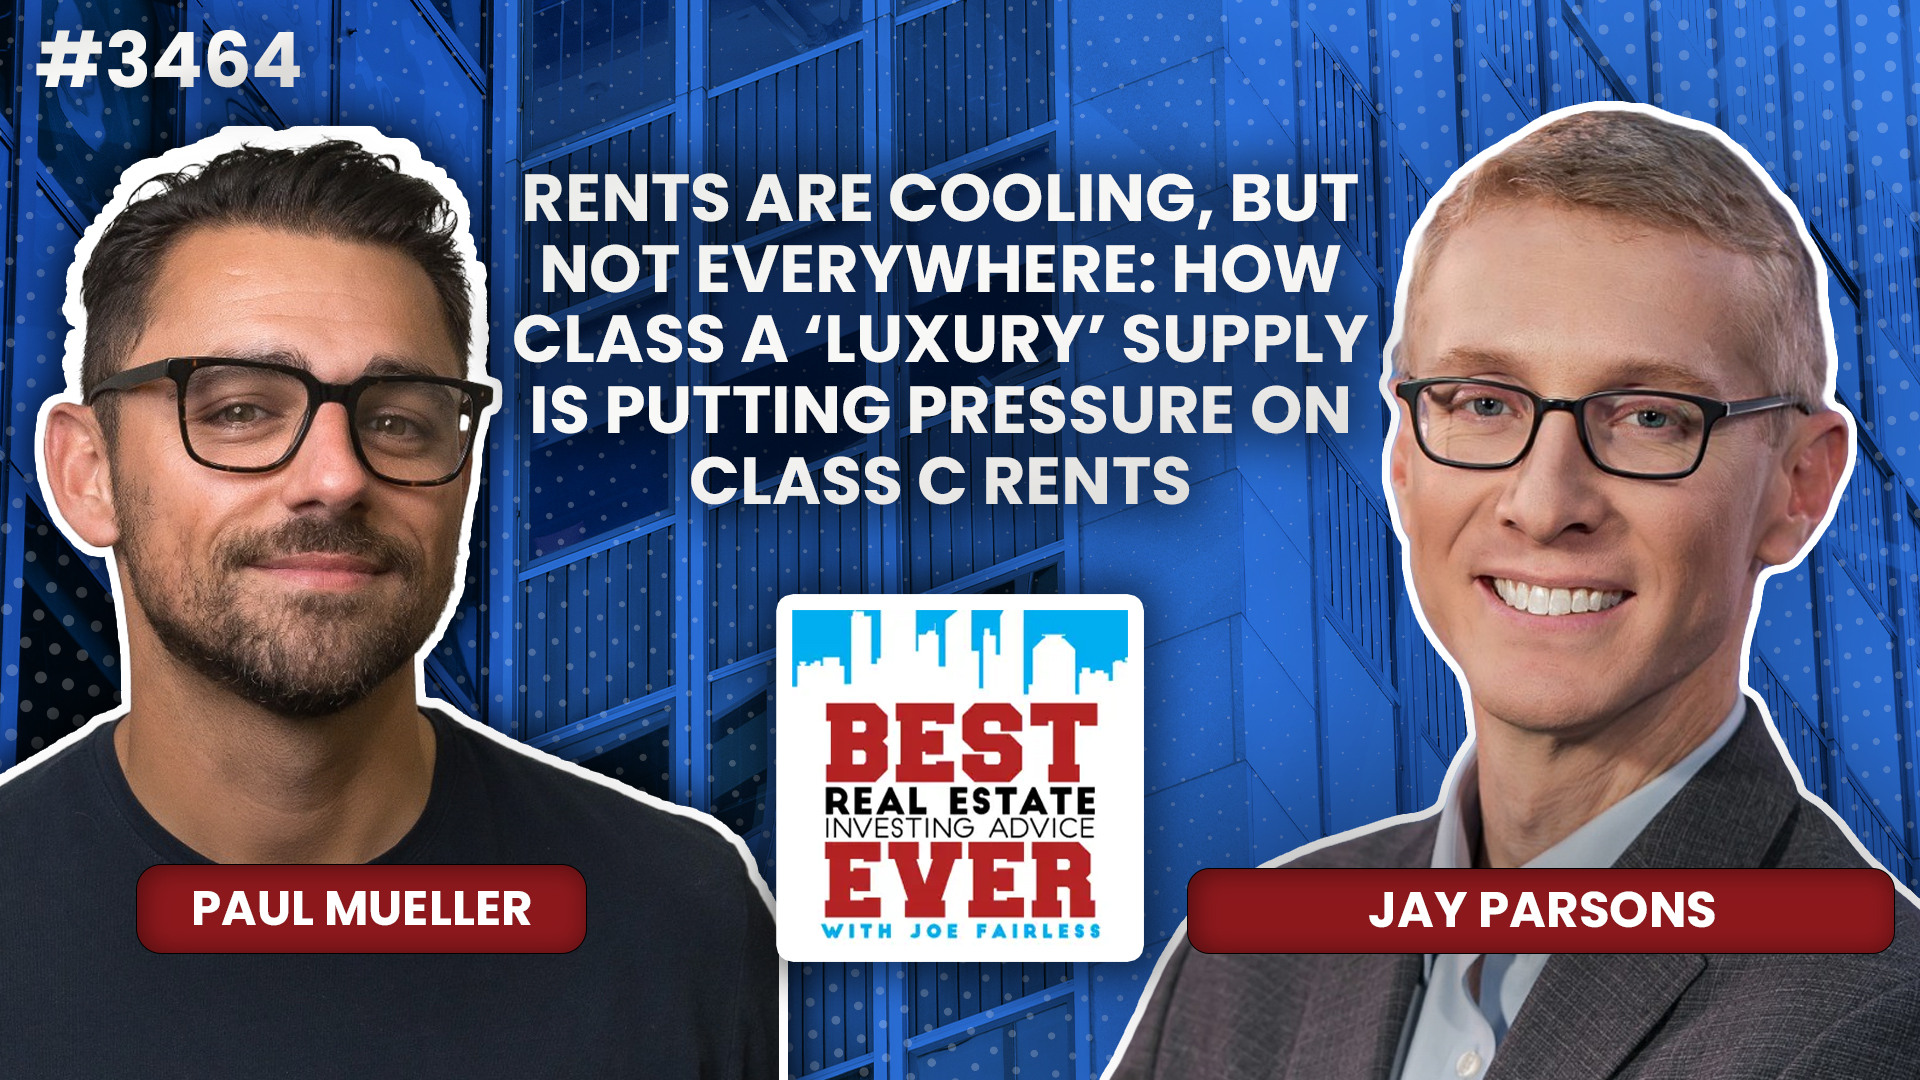 JF3464: Rents Are Cooling, but Not Everywhere: How Class A ‘Luxury’ Supply Is Putting Pressure on Class C Rents ft. Jay Parsons